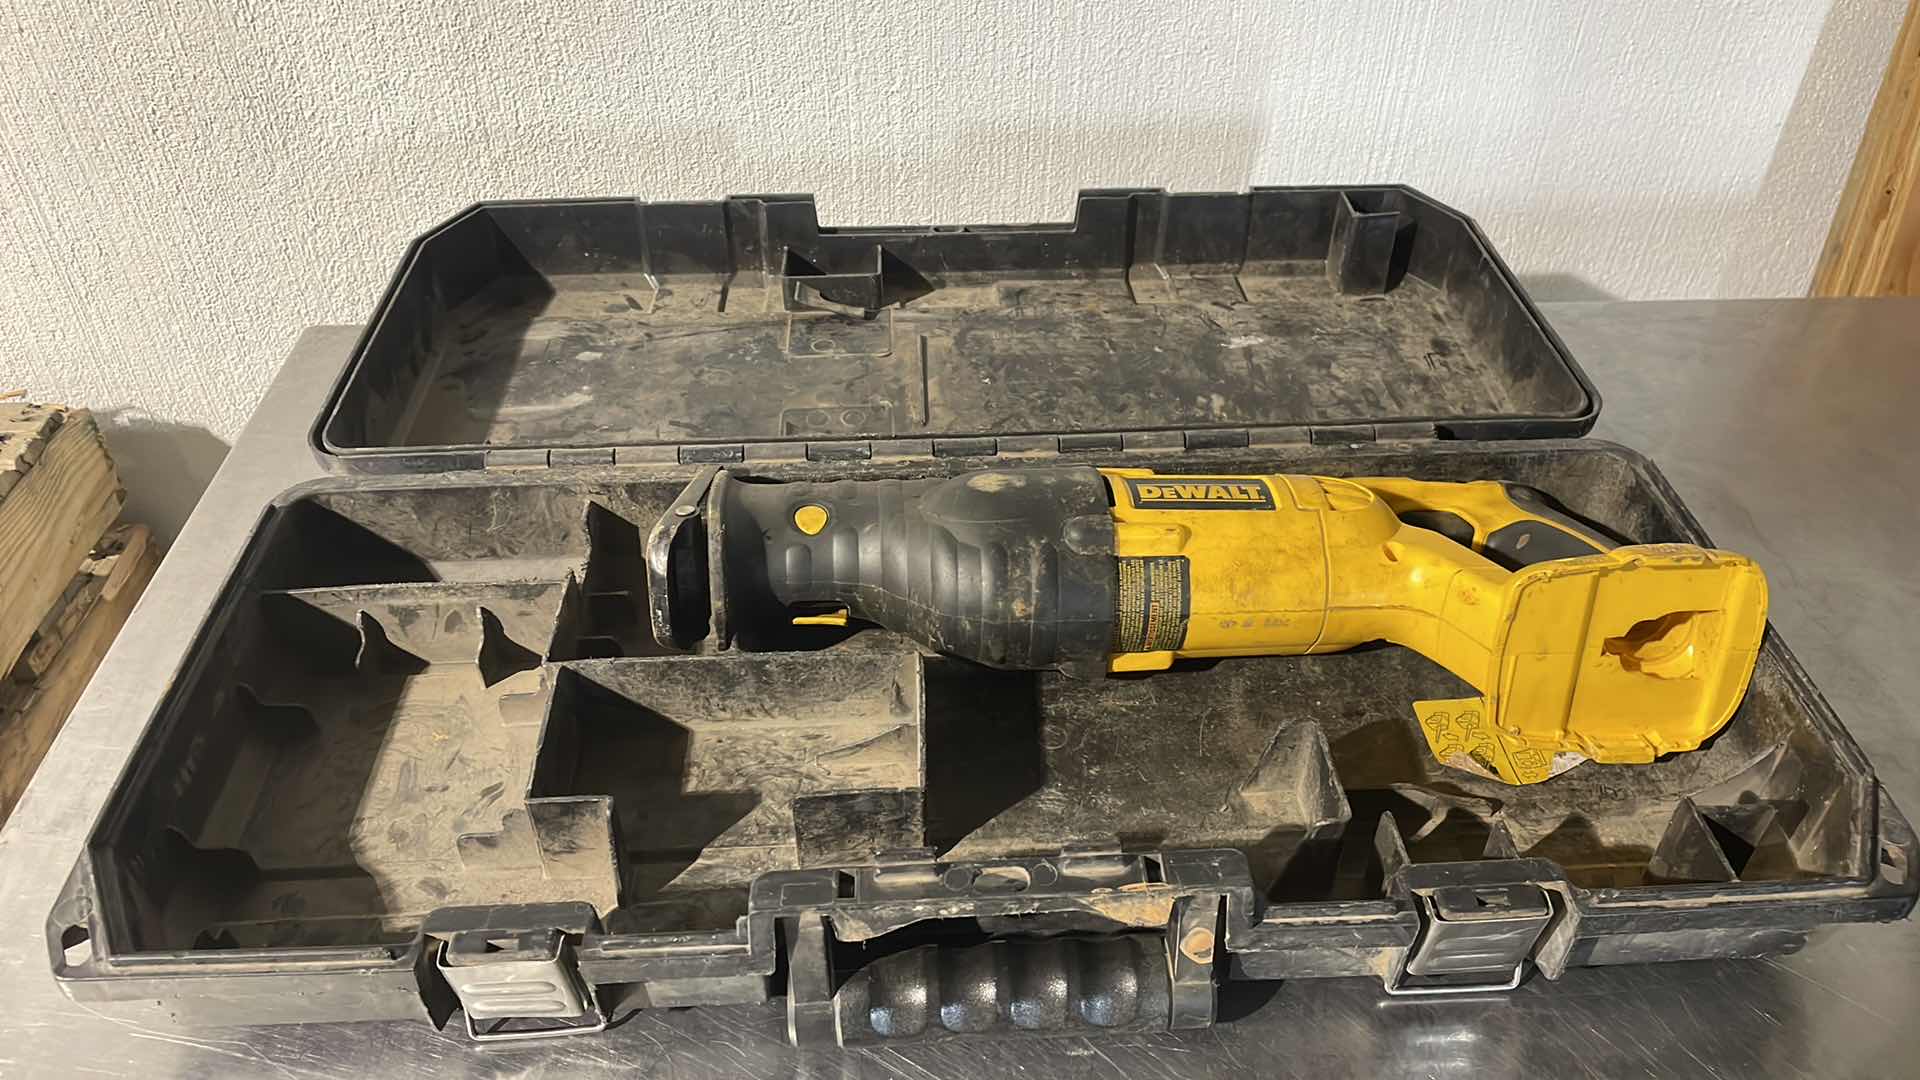 DEWALT DC385 18V VARIABLE SPEED RECIPROCATING SAW IN CASE NO BATTERY TESTED WORKING